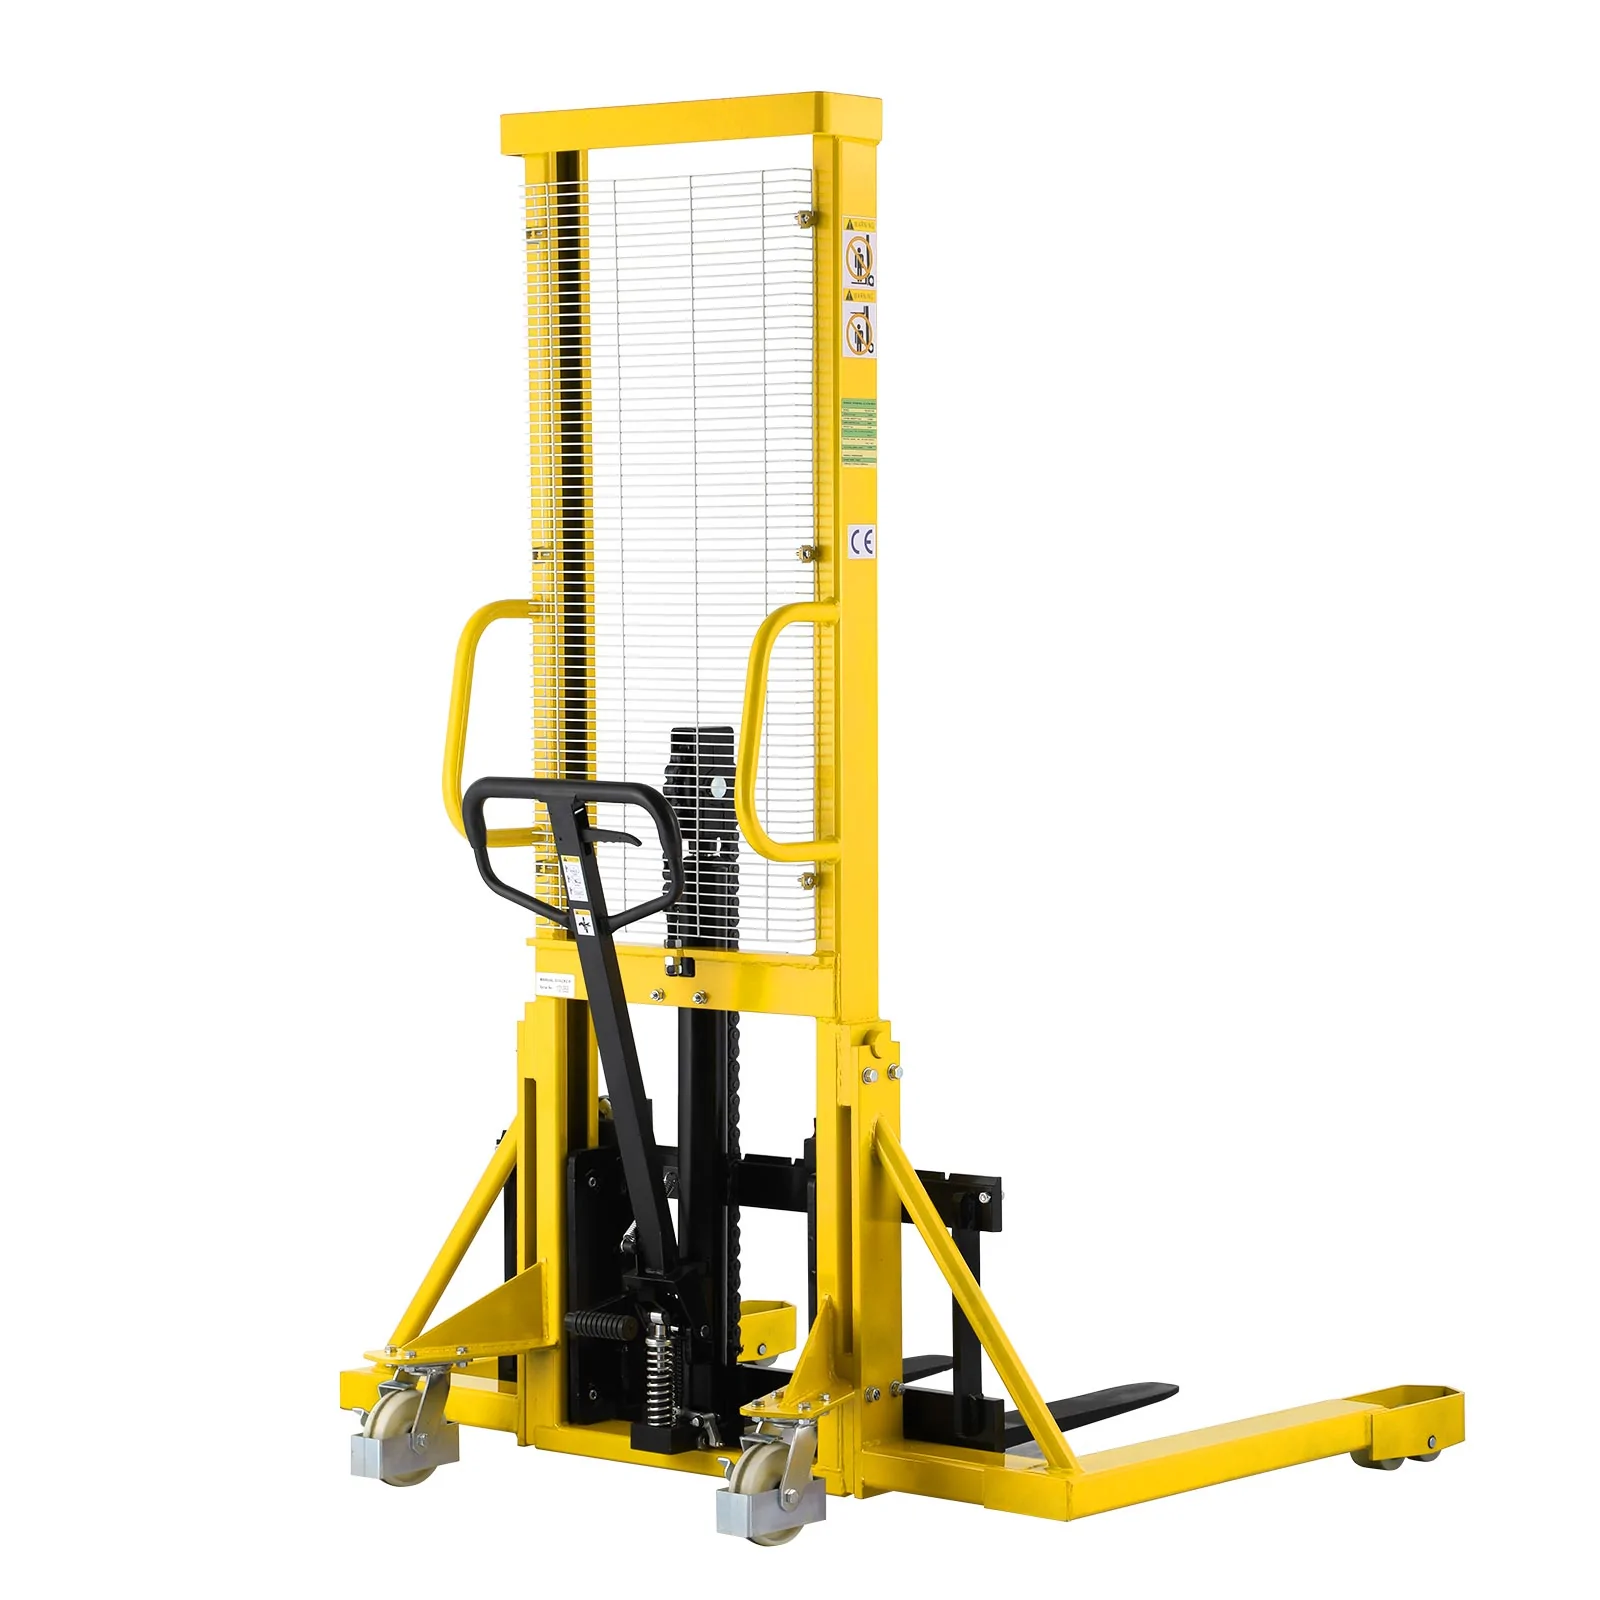 Hydraulic Hand Stacker with Straddle Legs 2200lbs Capacity 63" Lift Height SDJAS1016